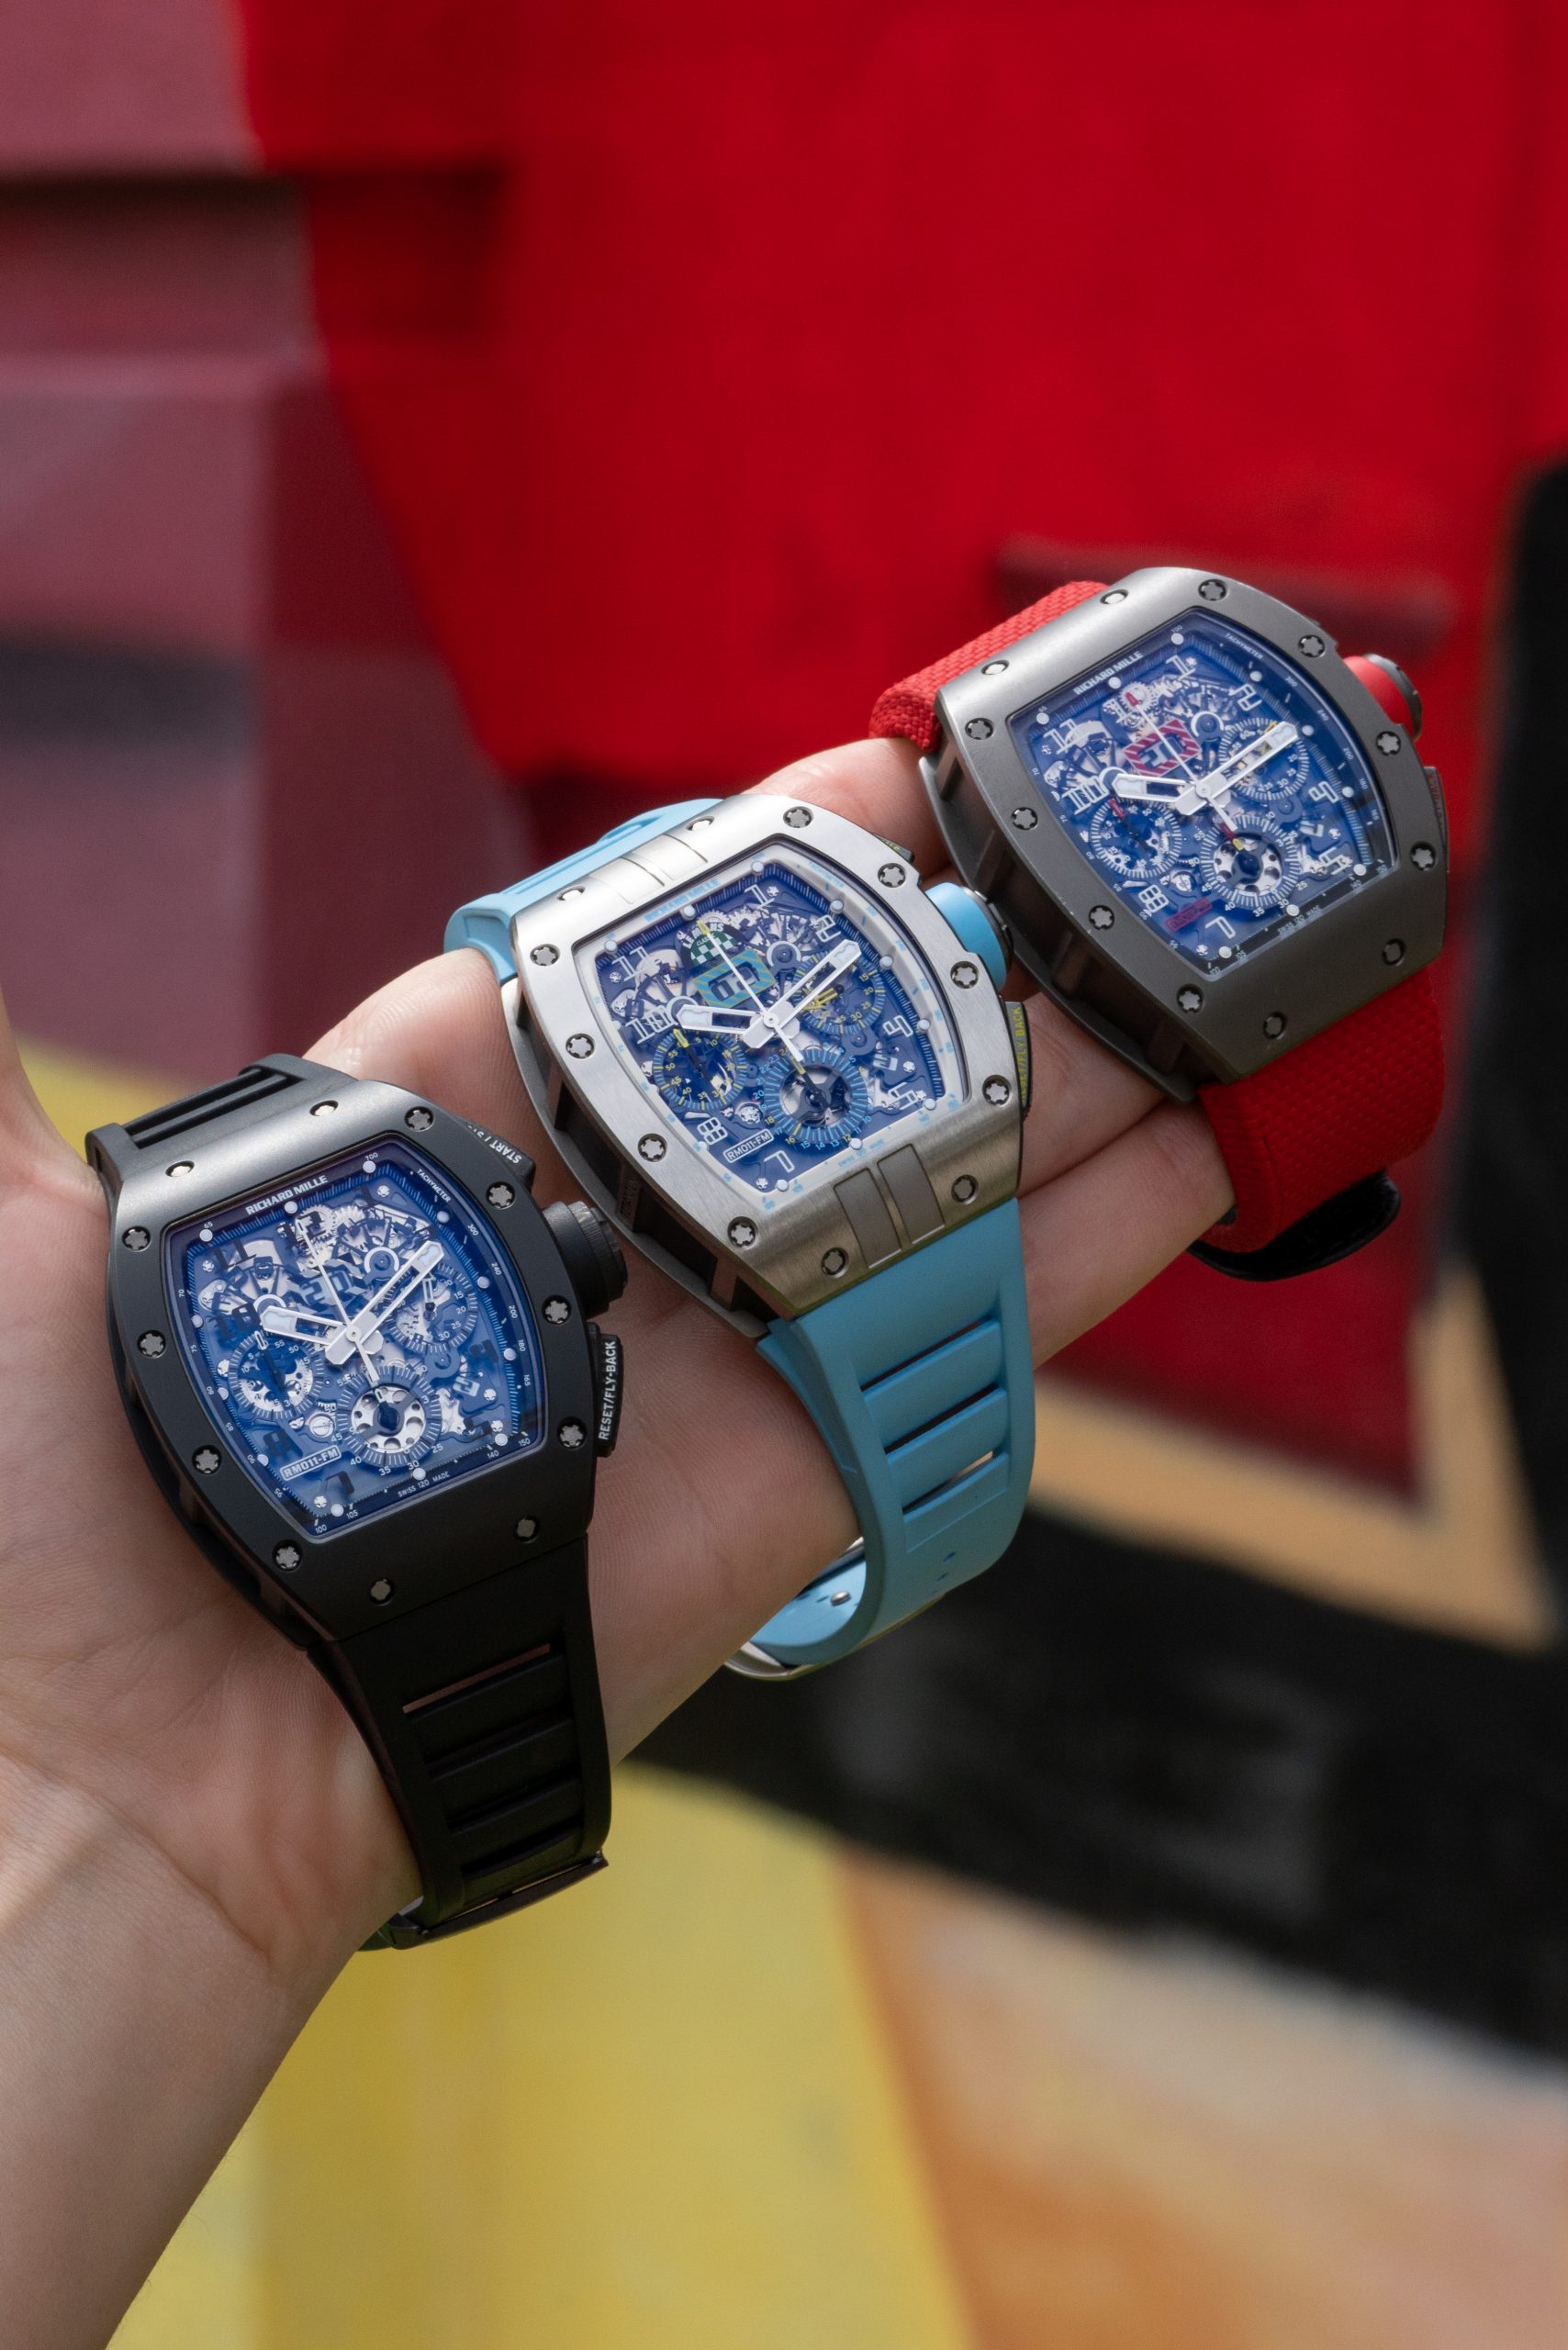 An early model of Richard Mille timepieces